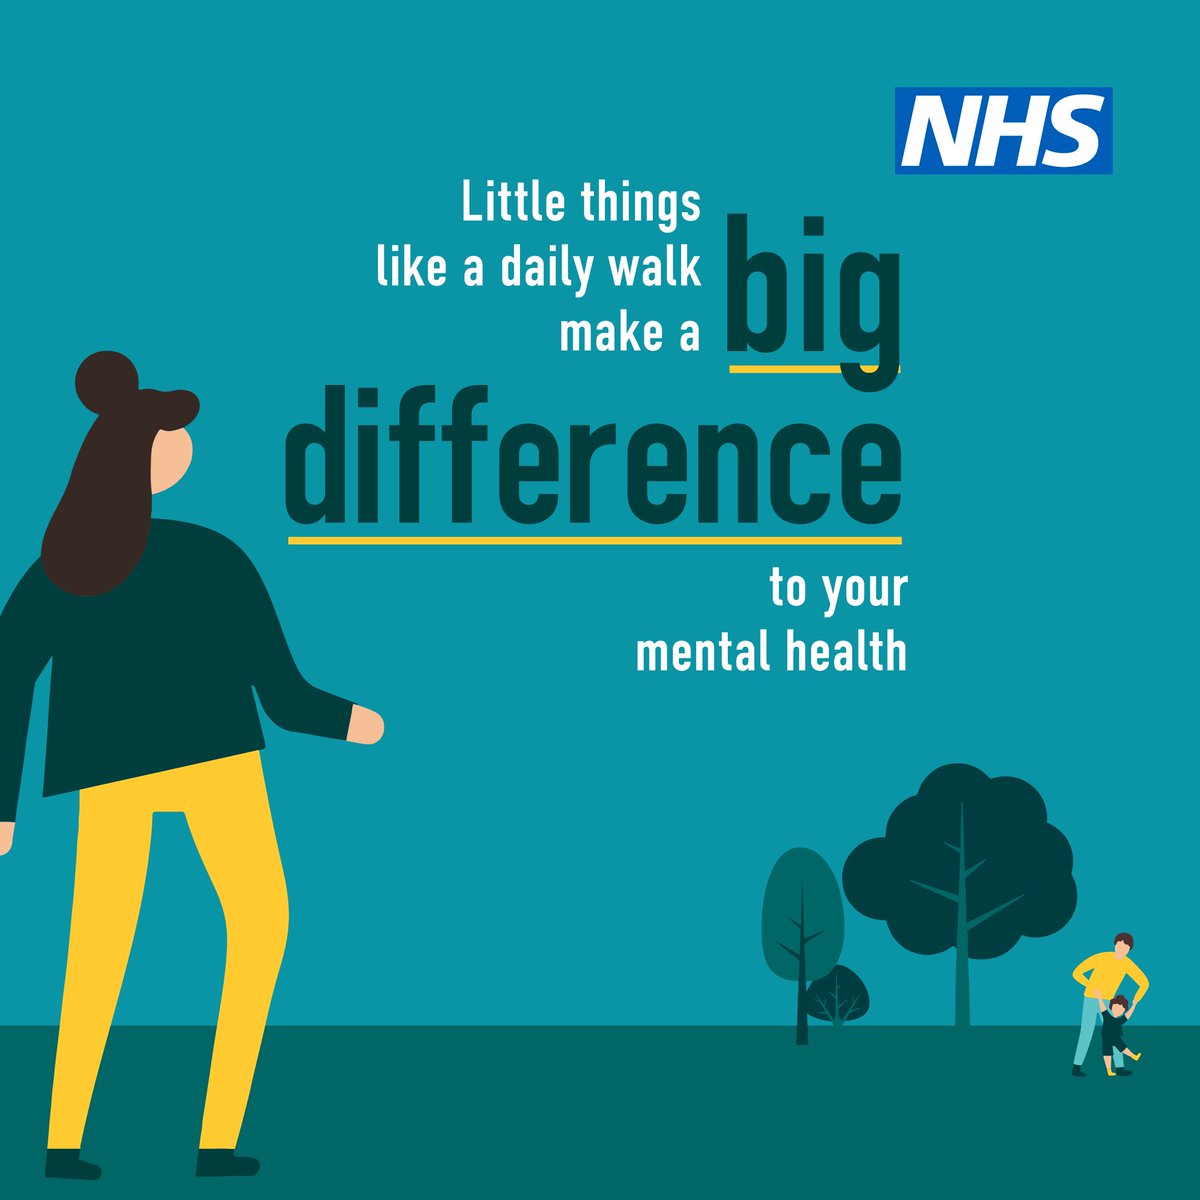 It's #NationalWalkingDay 🚶🚶‍♀️ A daily walk can give your body a boost, lift your mood and make everyday activities easier. Get more wellbeing tips from #EveryMindMatters: nhs.uk/every-mind-mat…